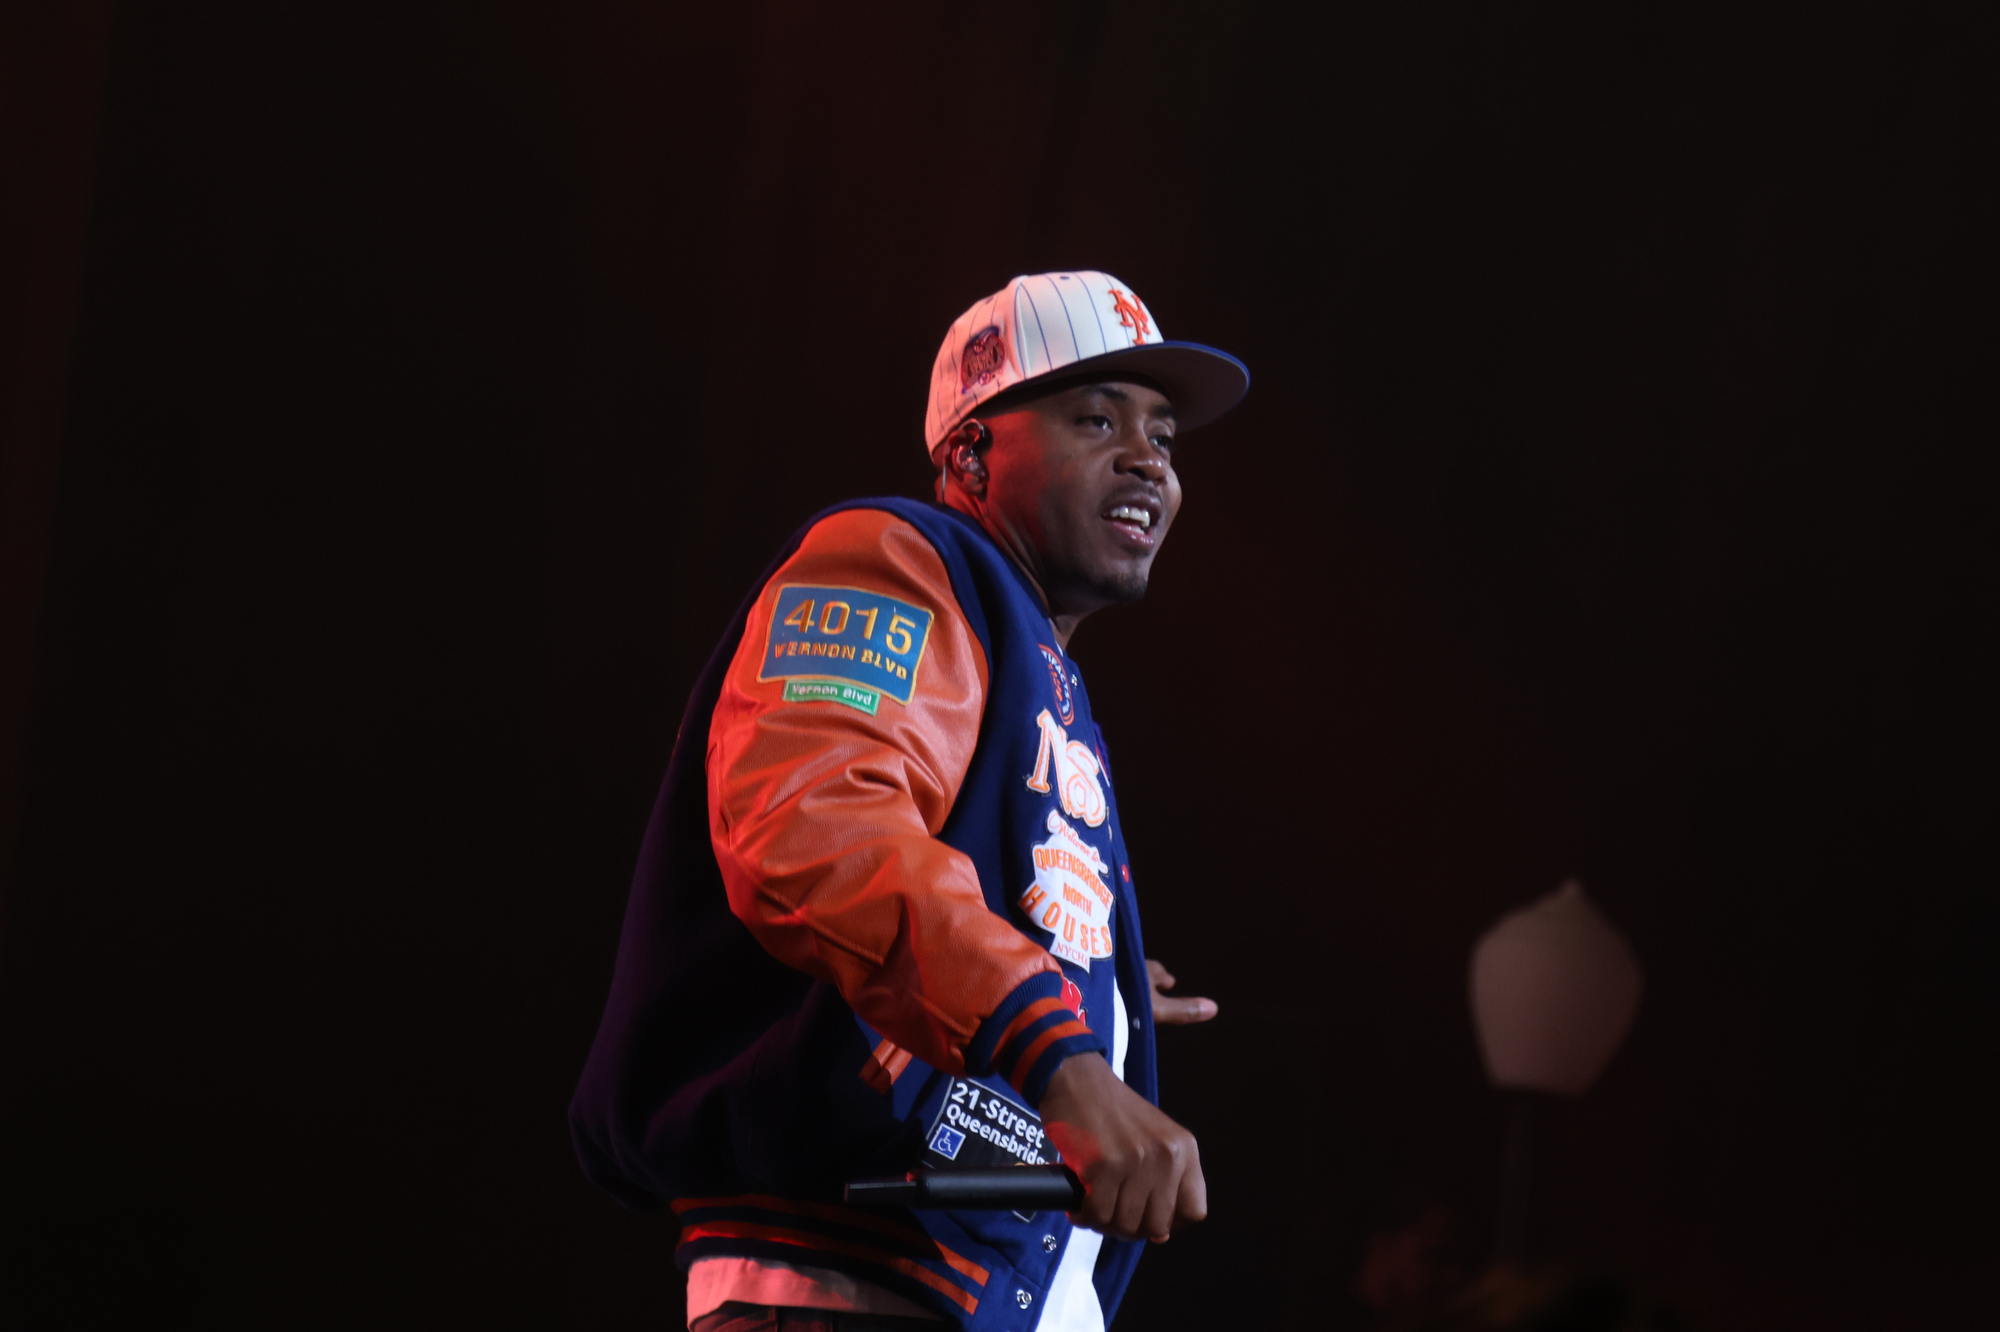 Nas, Wu-Tang Clan's tour is the utopia hip-hop heads dream of